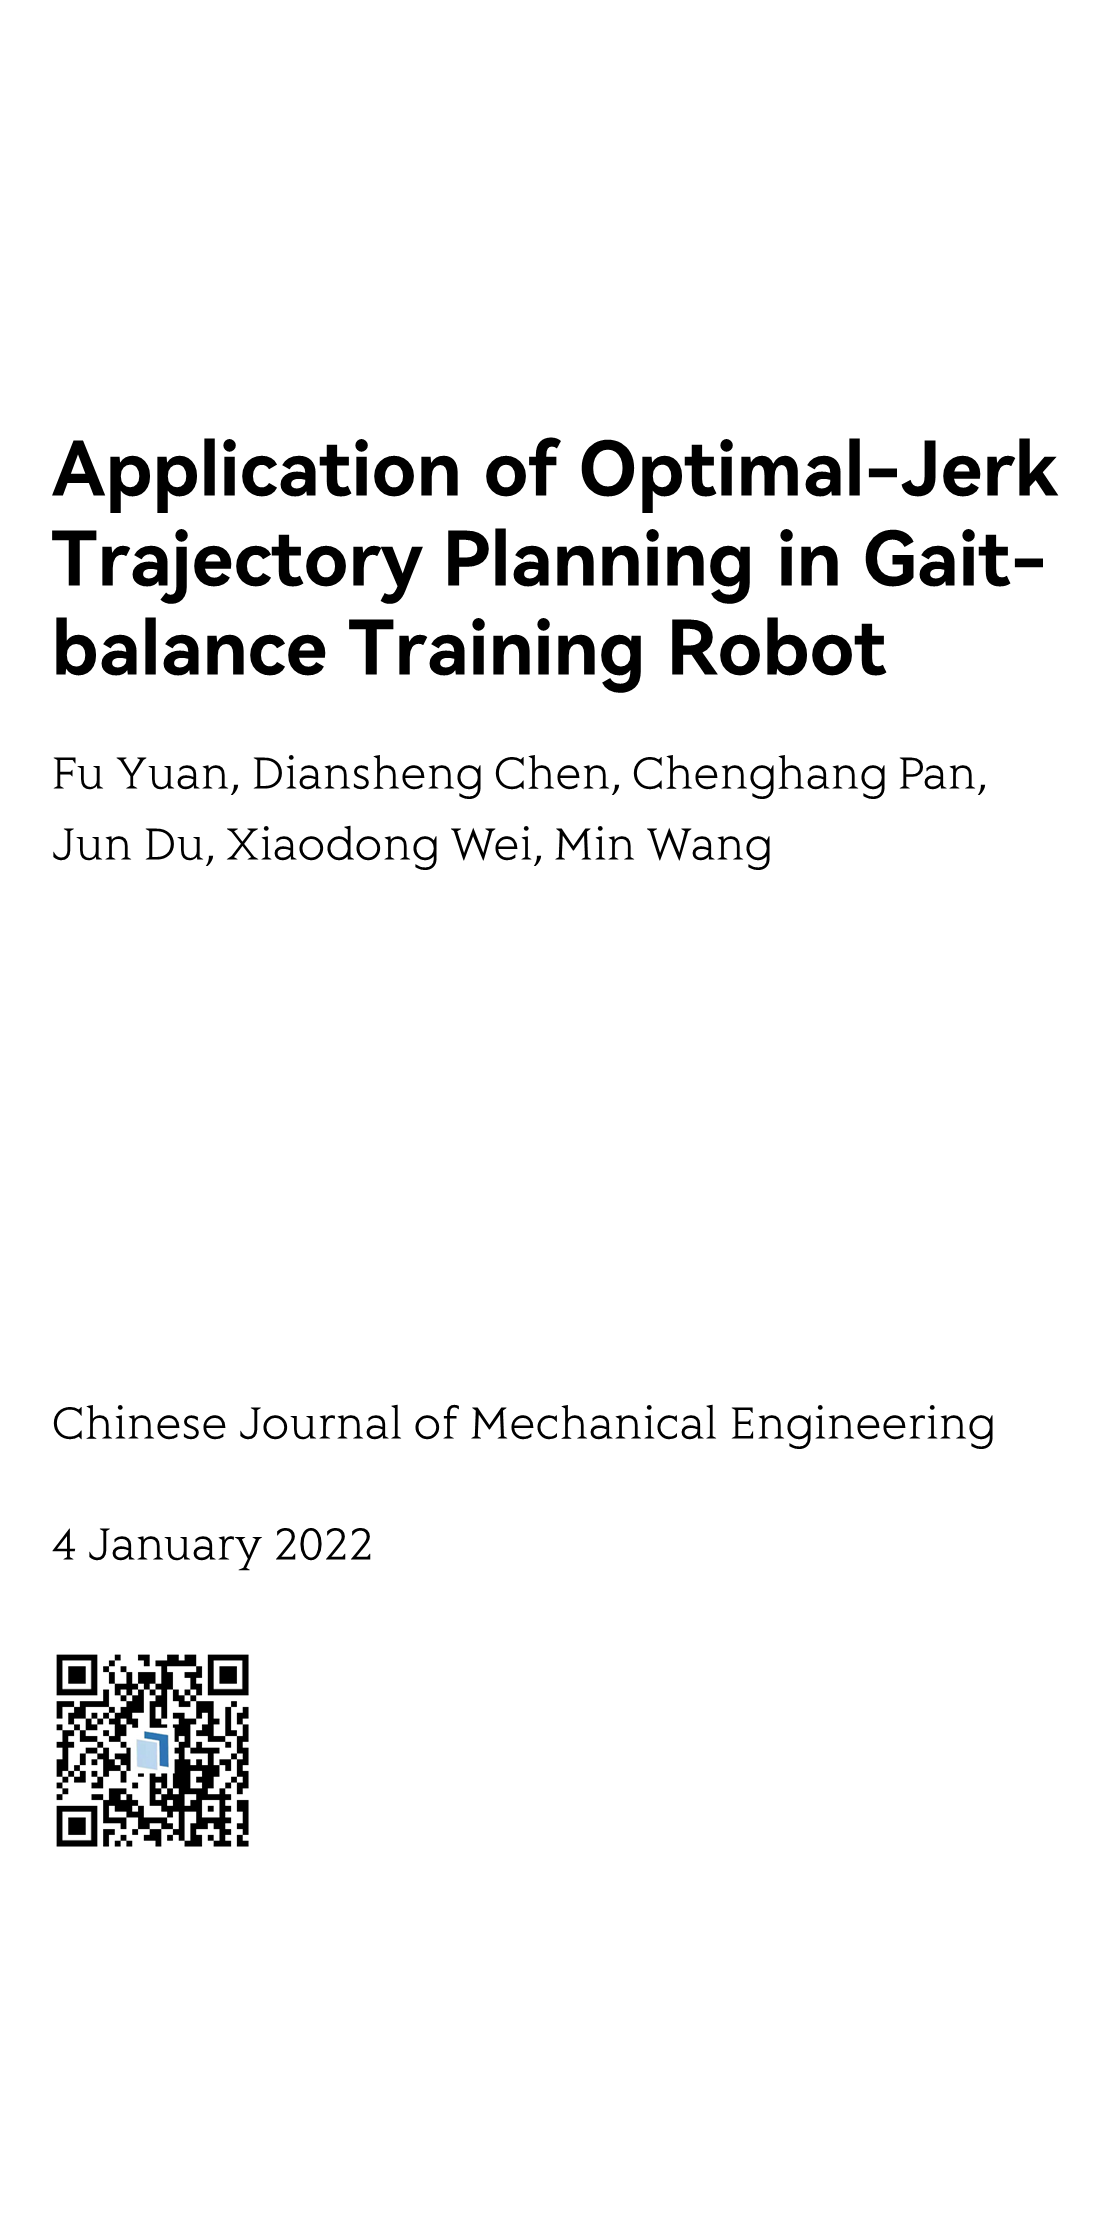 Chinese Journal of Mechanical Engineering_1